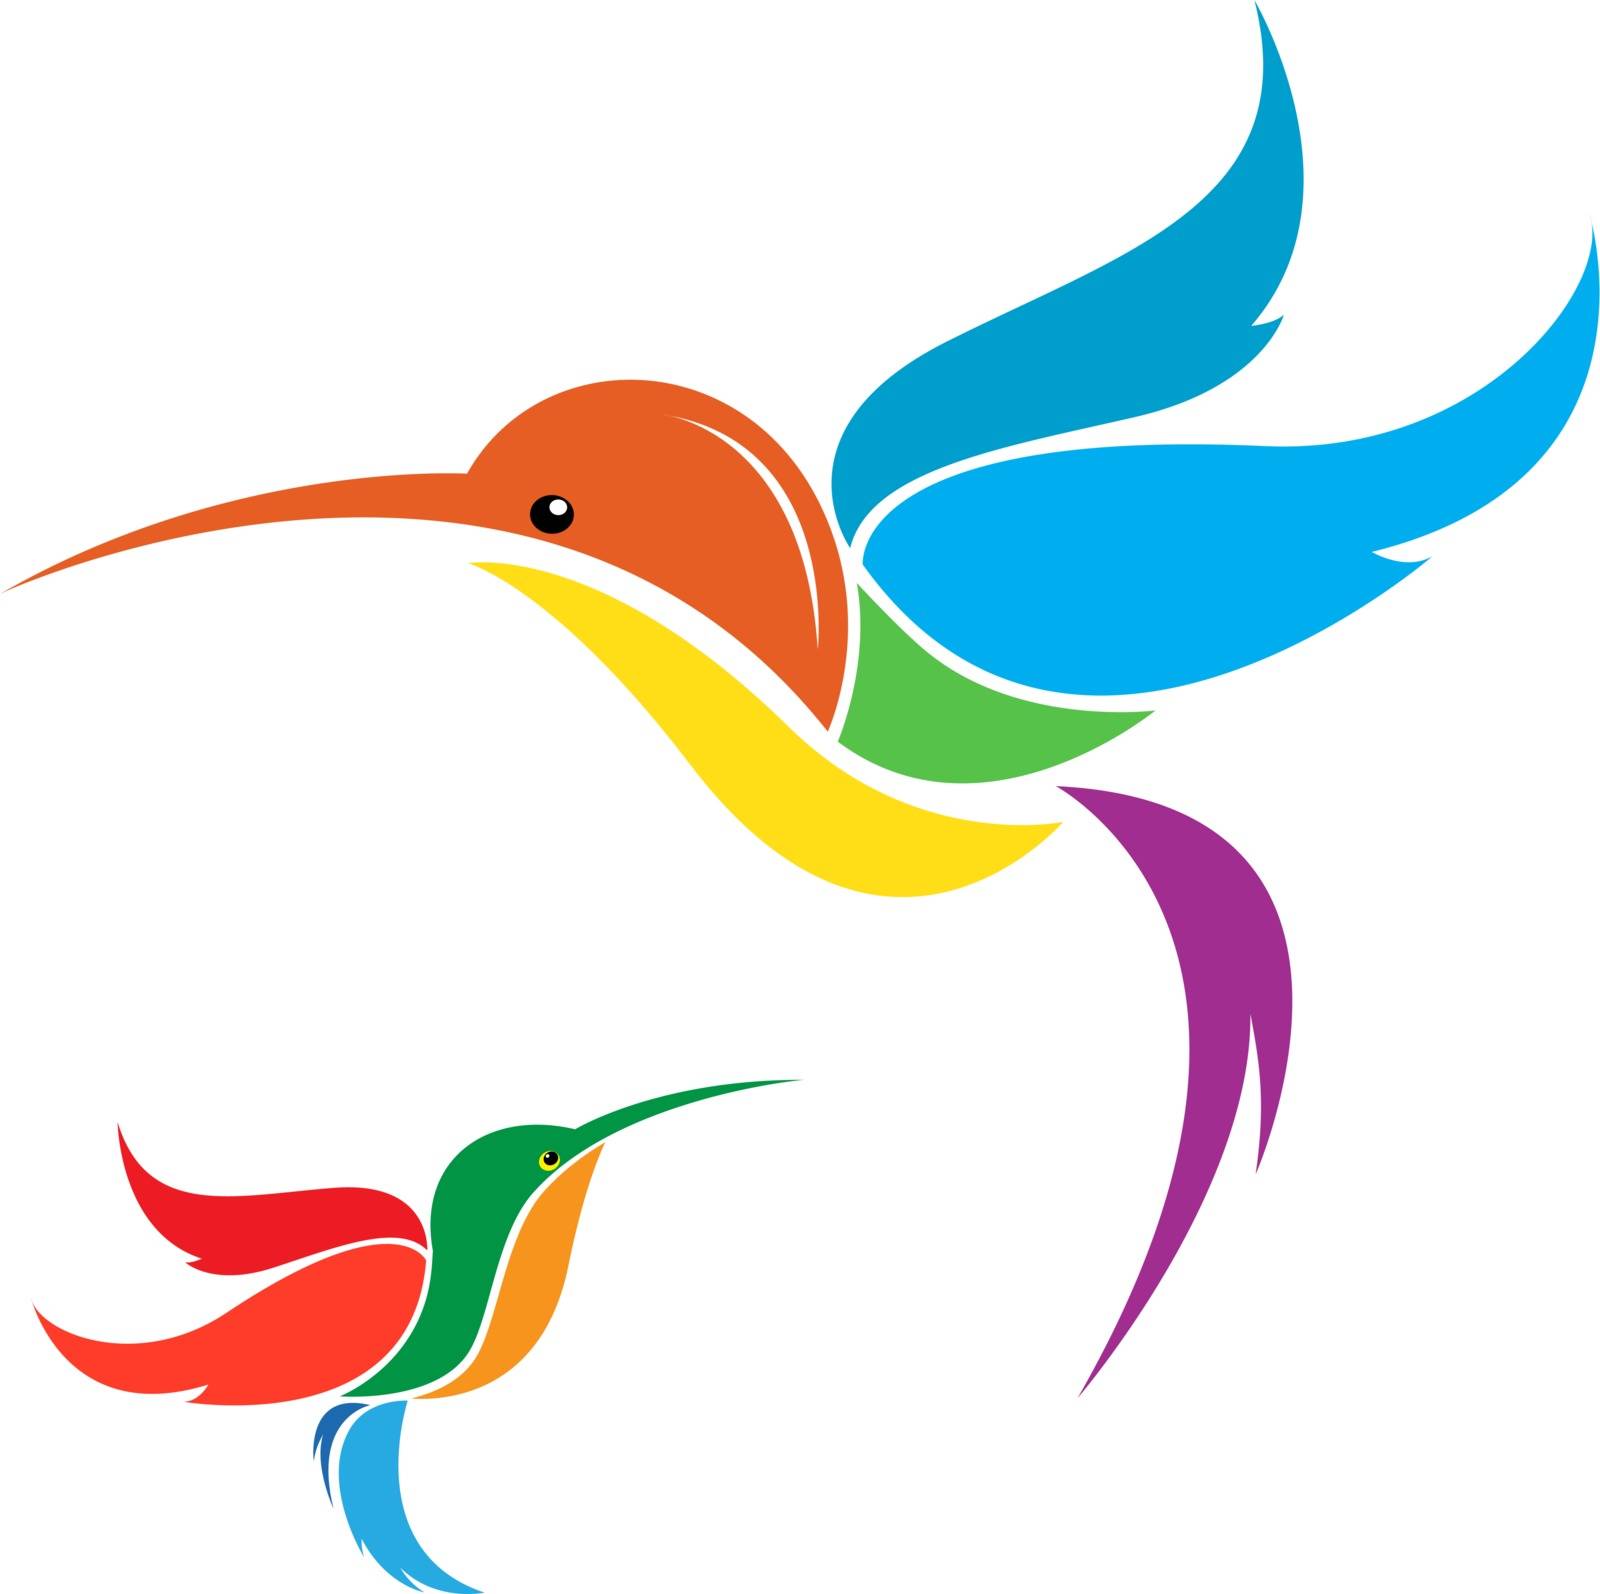 Vector image of an hummingbird on white background